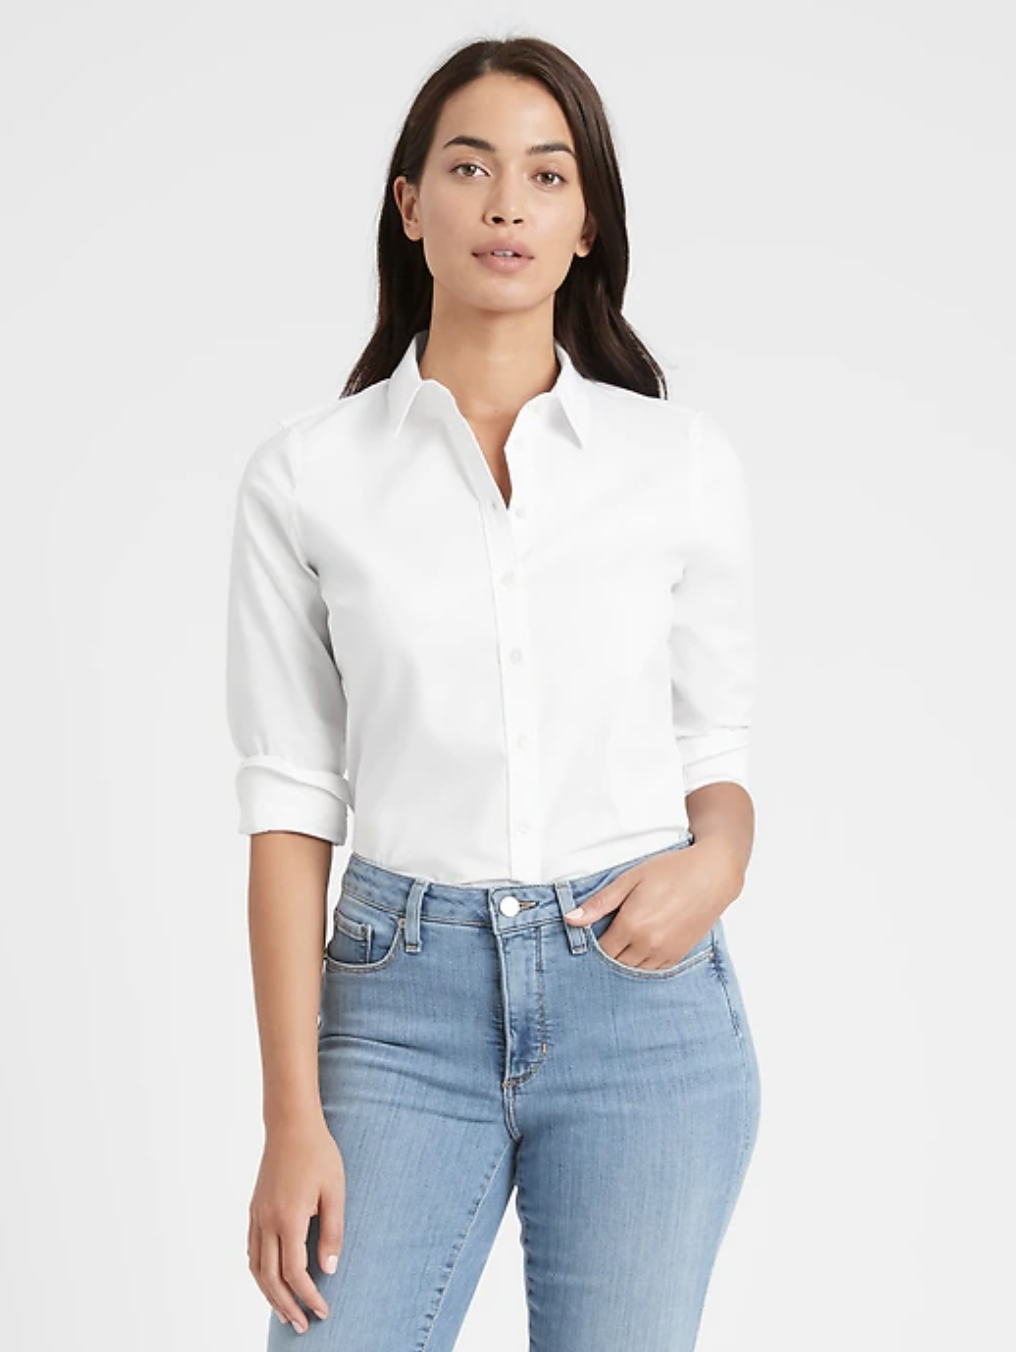 27 Best Stores For Business Casual Work Clothes 2022